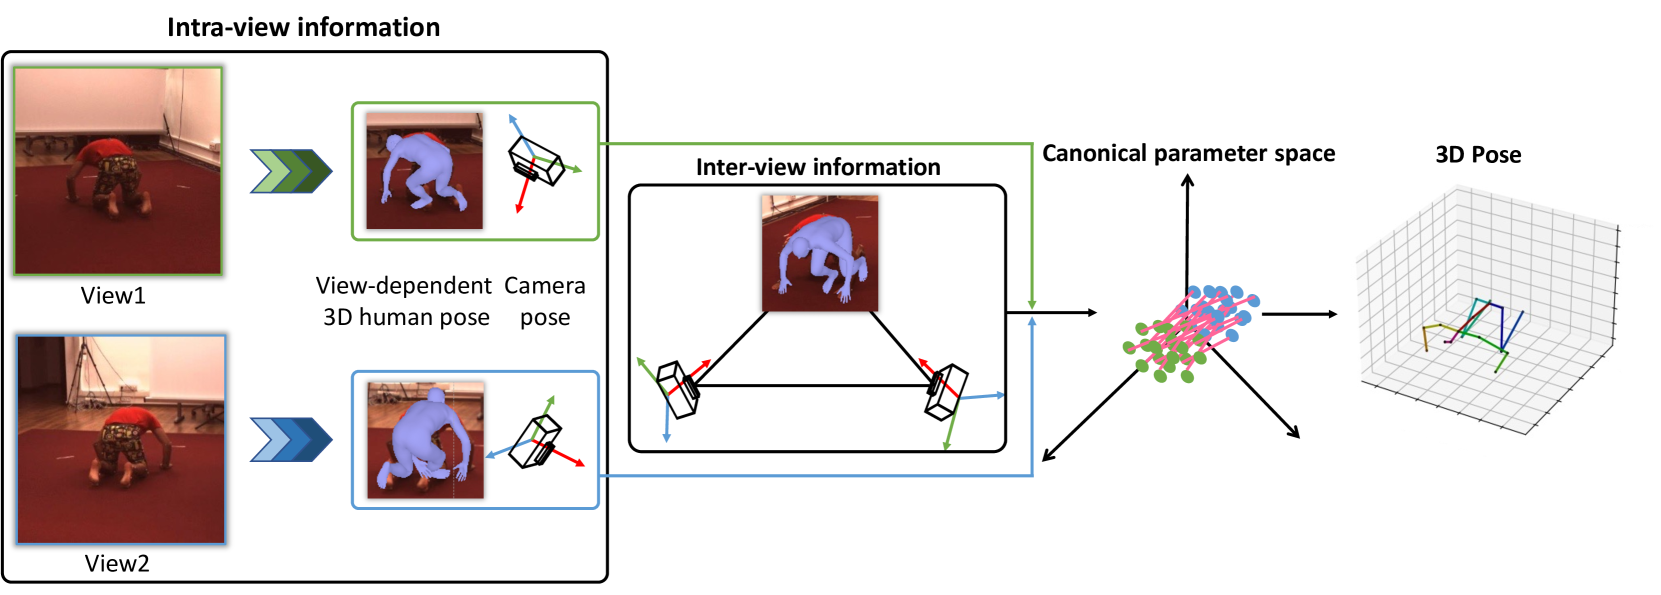 Self-learning Canonical Space for Multi-view 3D Human Pose Estimation